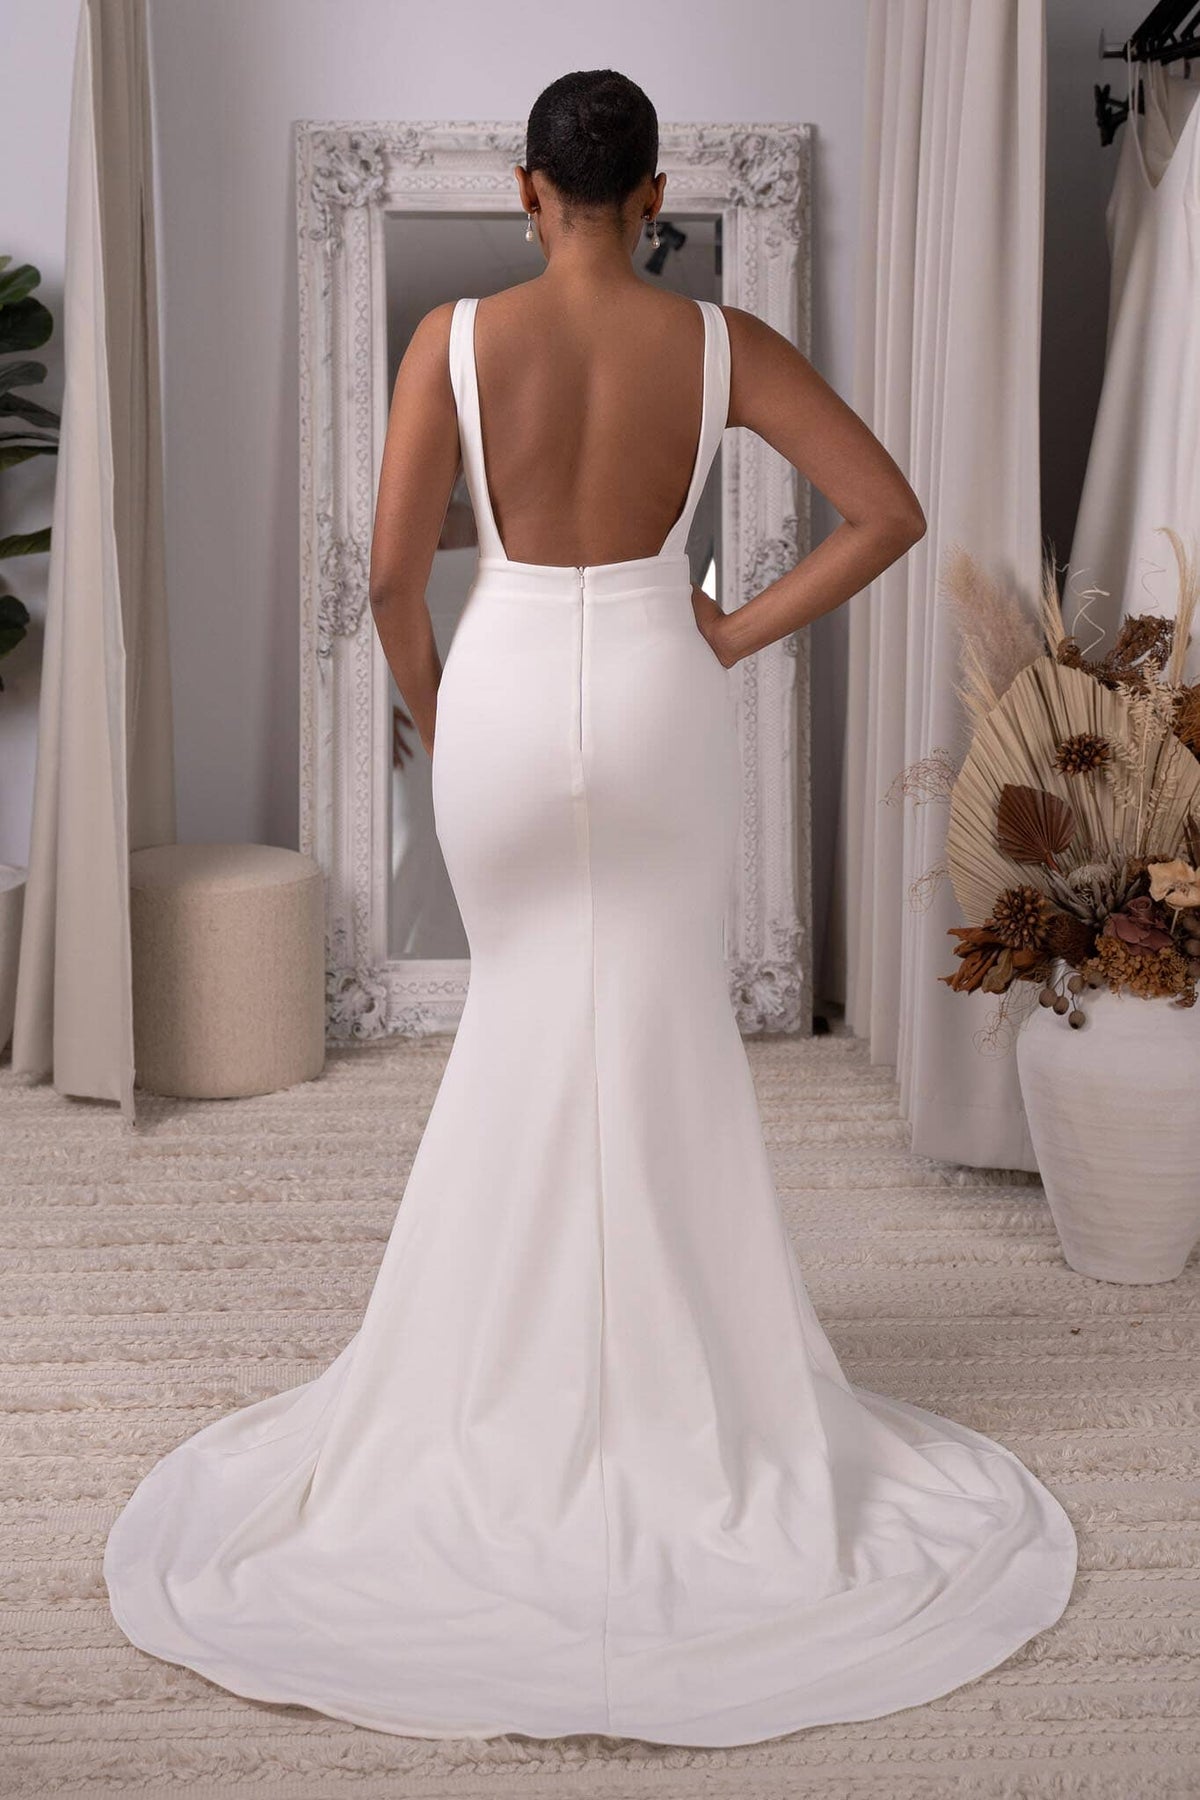 Square Open Back Design of Ivory White Fitted Crepe Wedding Gown with Square Neckline, Side Mesh and Sweep Train